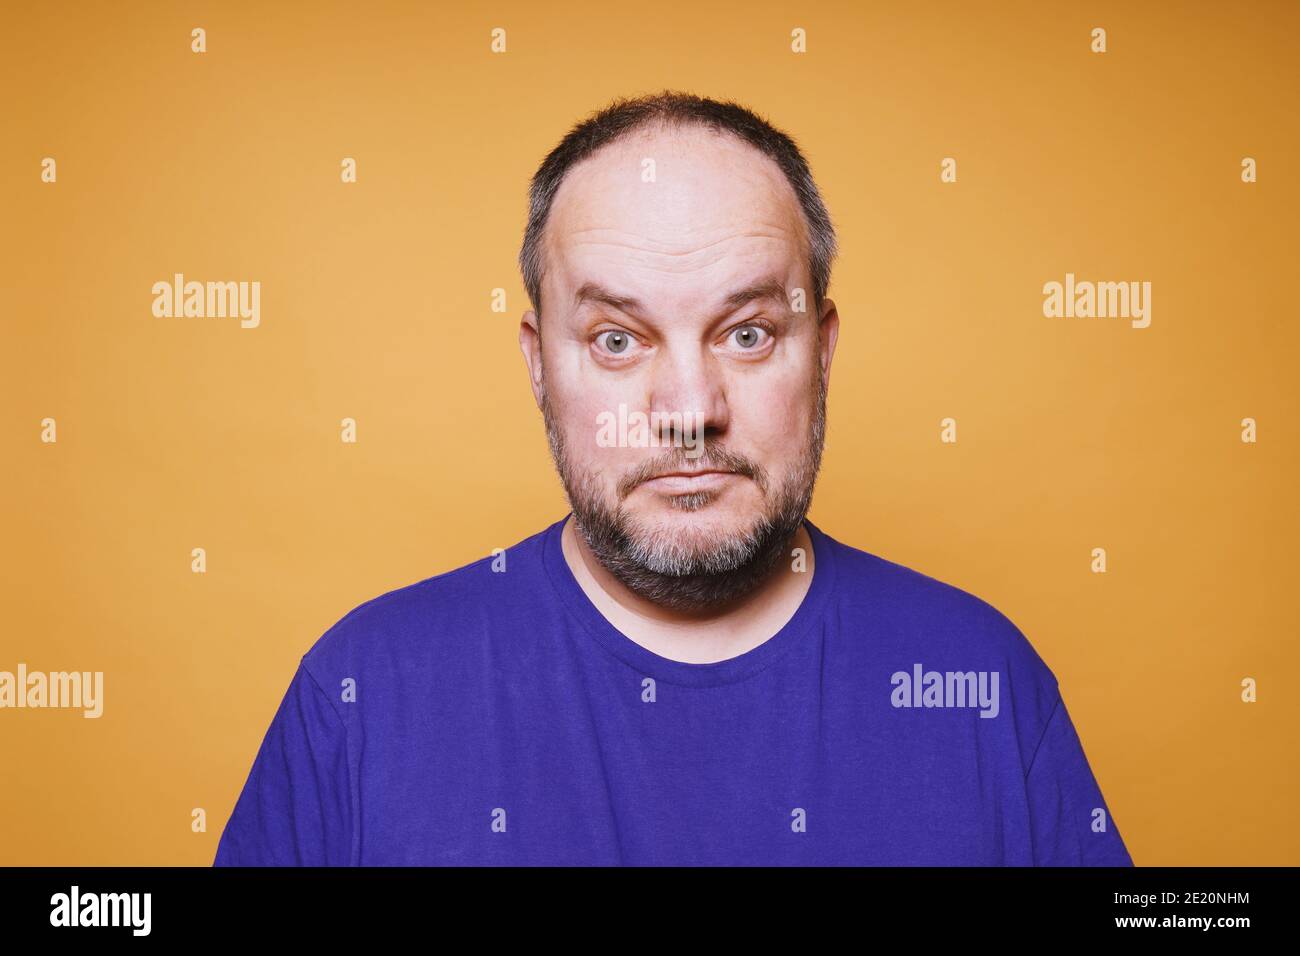 portrait of mid adult man with dumbfounded look on his face against orange color studio background - bewildered facial expression Stock Photo